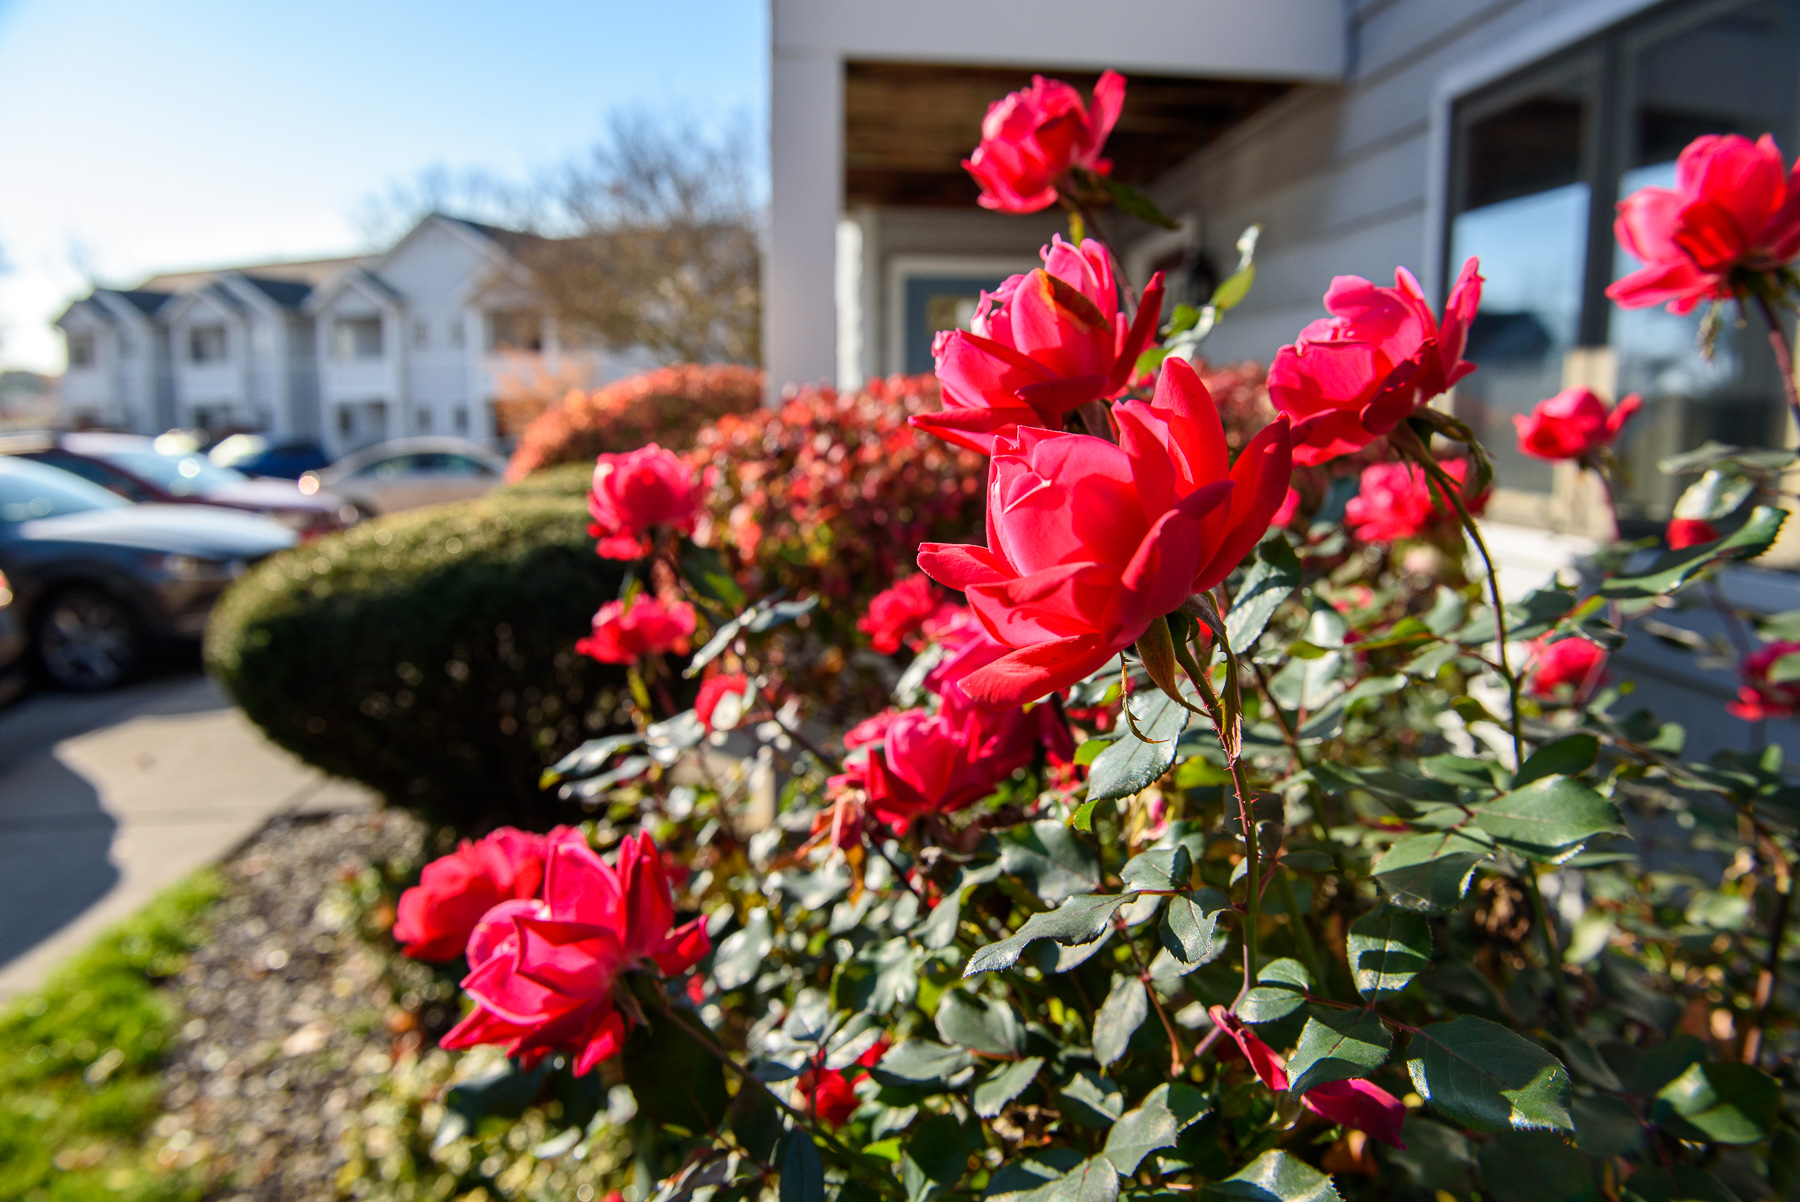 Landscaping outside Corn Hill Apartments Showing Roses in Bloom